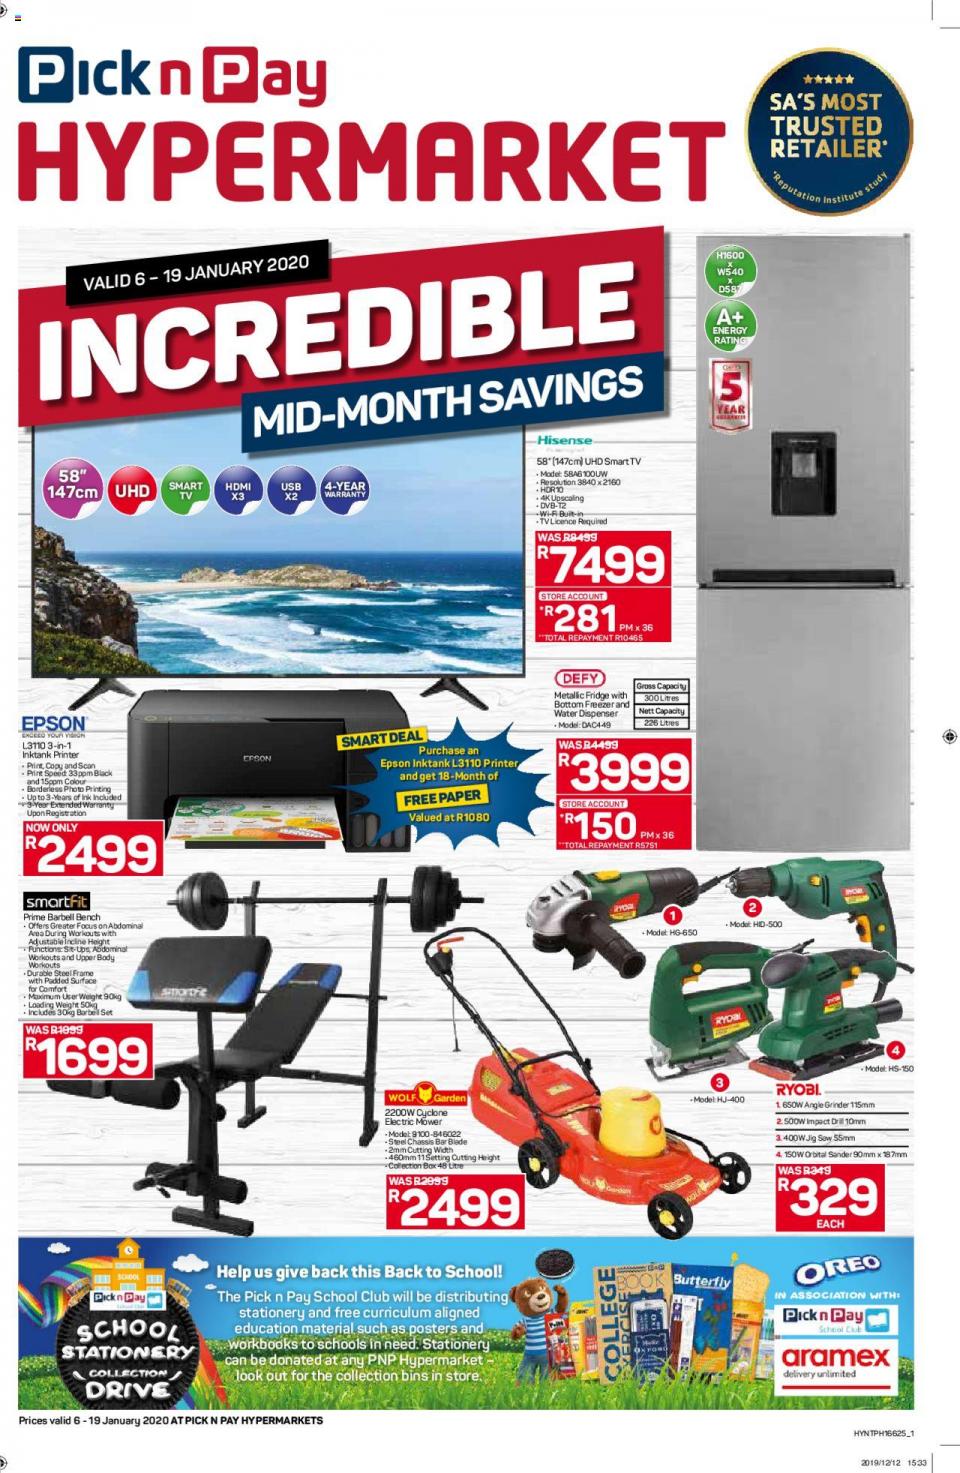 pick n pay specials mid month savings hypermarket 7 january 2020